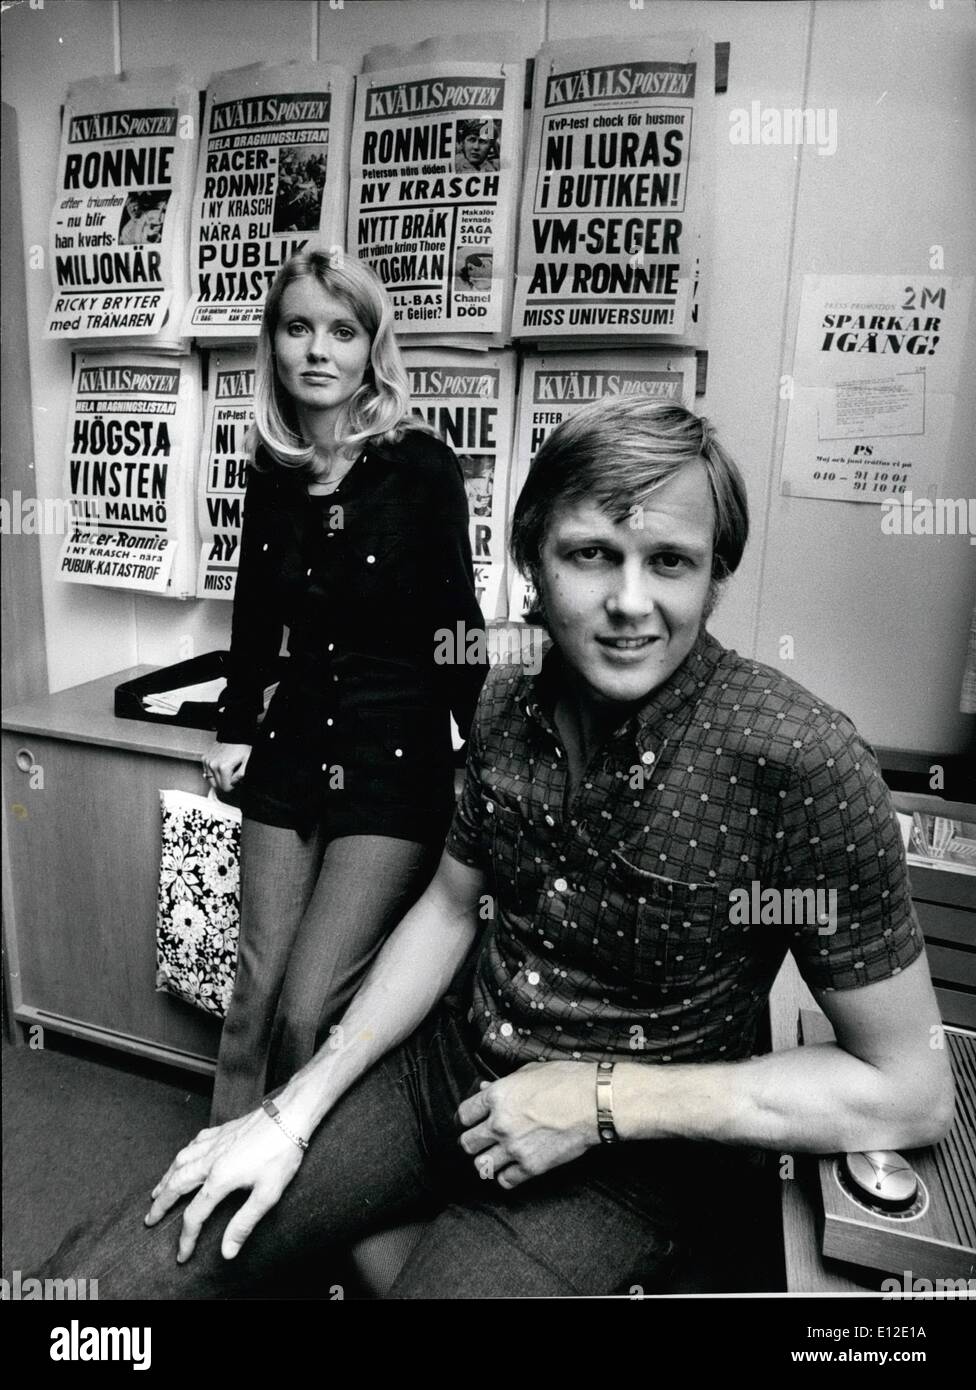 Ronnie and Barbro Peterson at Berlin on 15 December 1972. 